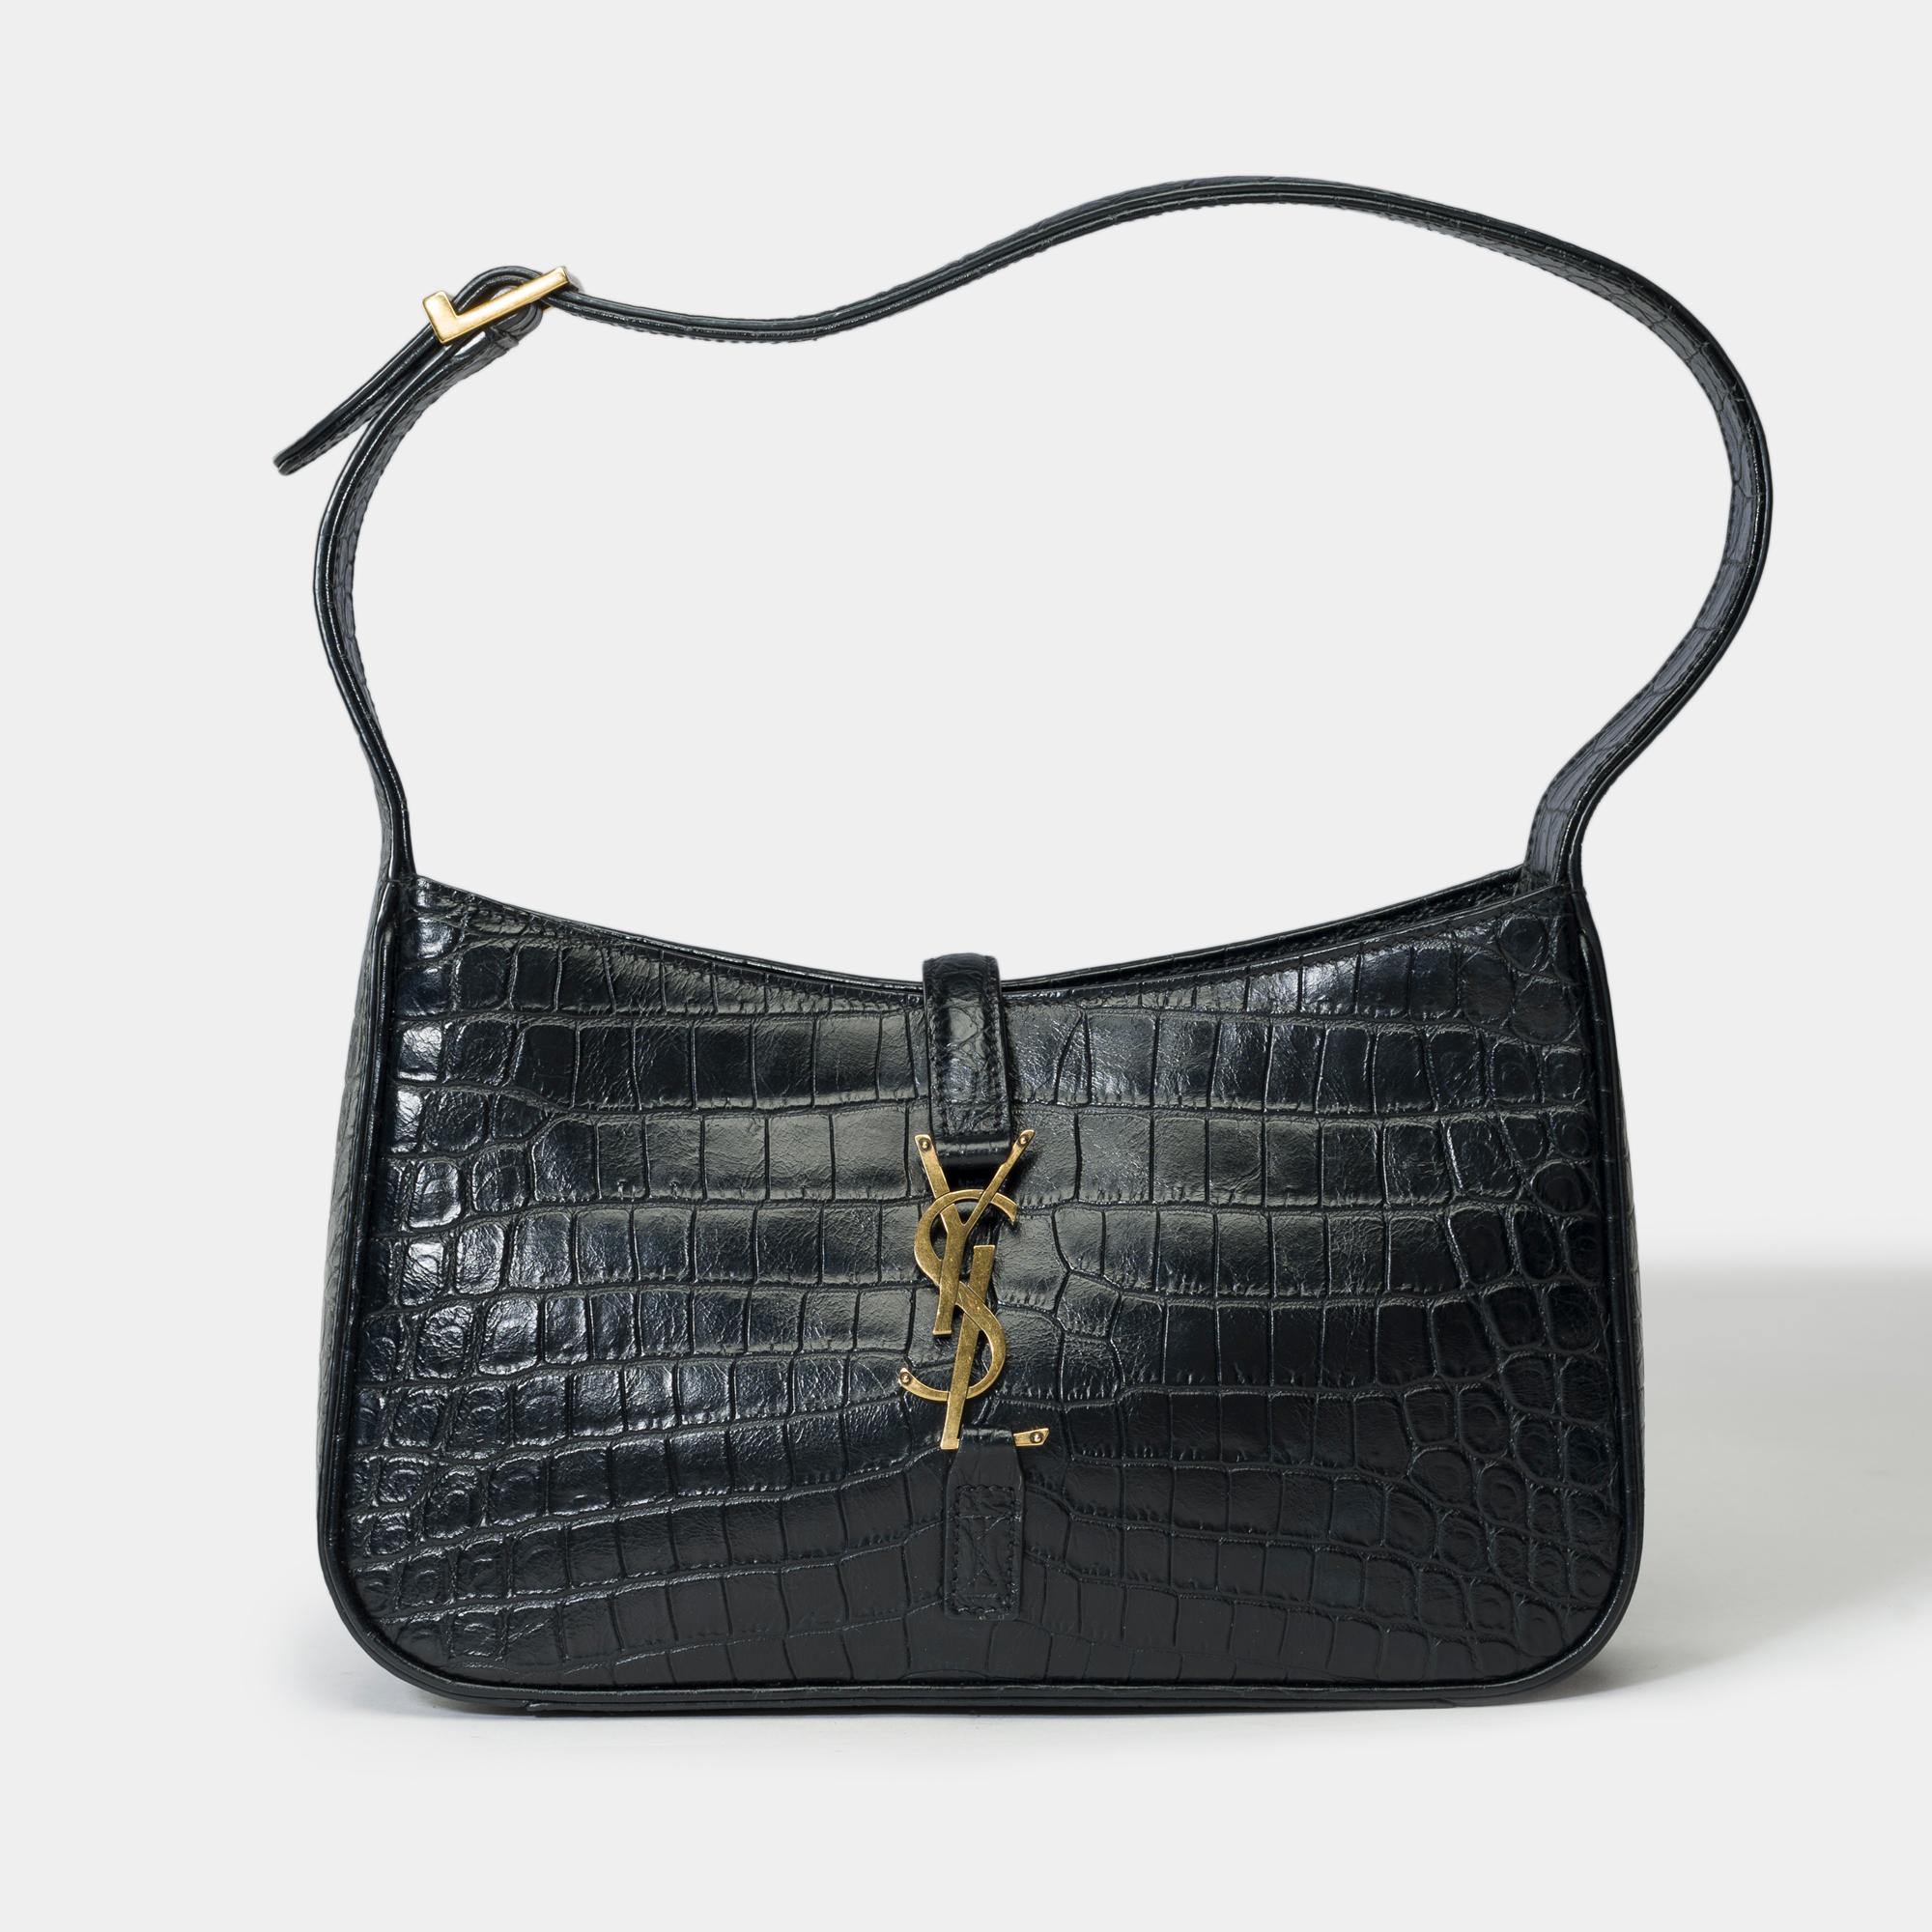 Trendy​ ​Yves​ ​Saint-Laurent​ ​5​ ​à​ ​7​ ​hobo​ ​bag​ ​in​ ​black​ ​calf​ ​leather​ ​embossed​ ​crocodile​ ​closed​ ​by​ ​a​ ​black​ ​leather​ ​tab​ ​decorated​ ​with​ ​brittle​ ​and​ ​lined​ ​with​ ​black​ ​suede

Inner​ ​lining​ ​in​ ​brown​